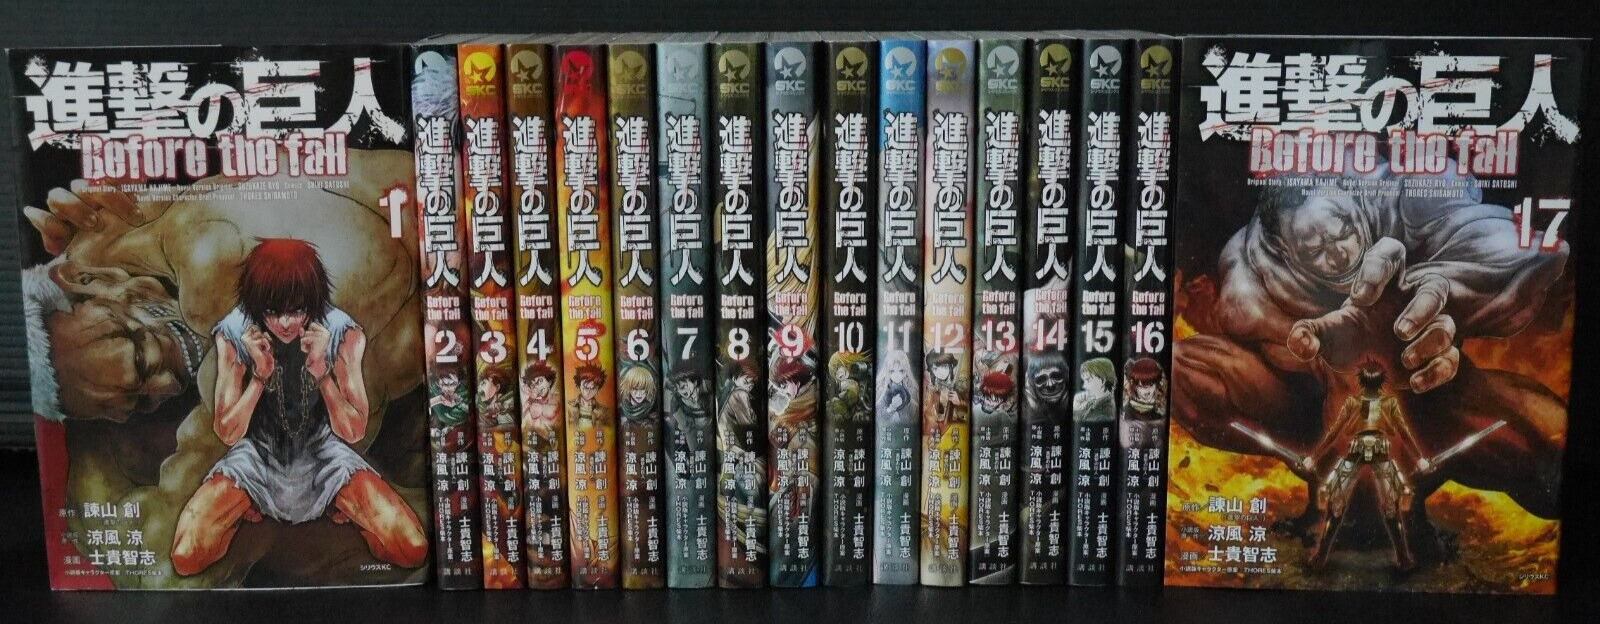 Attack on Titan Before the fall Manga Vol.1~17 Complete Set - Japan Import